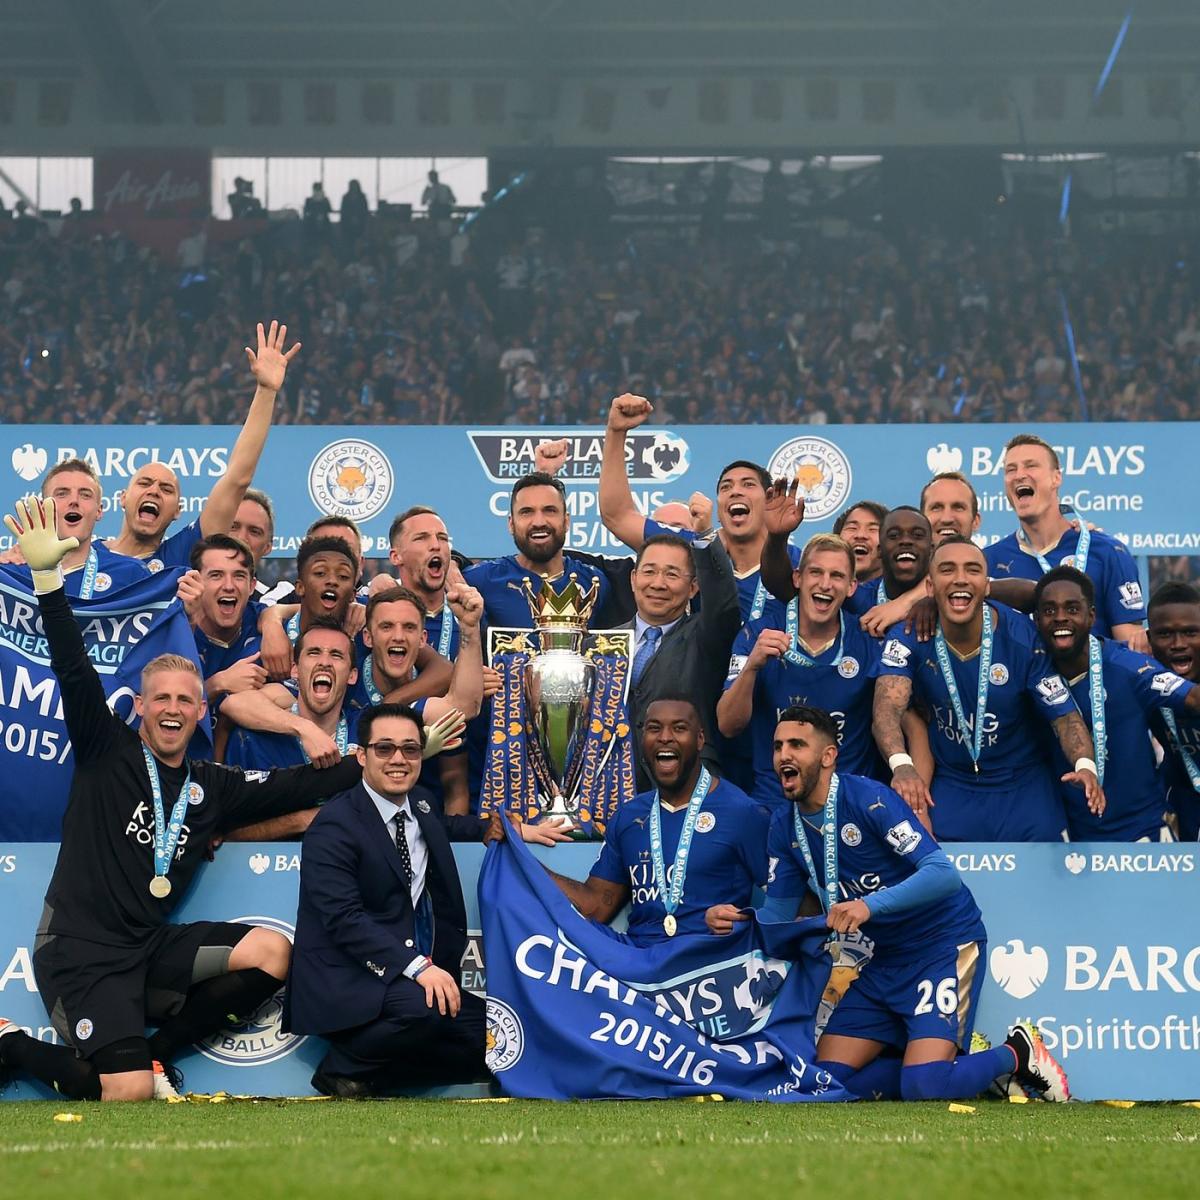 Leicester celebrating winning the Premier League-Getty Images